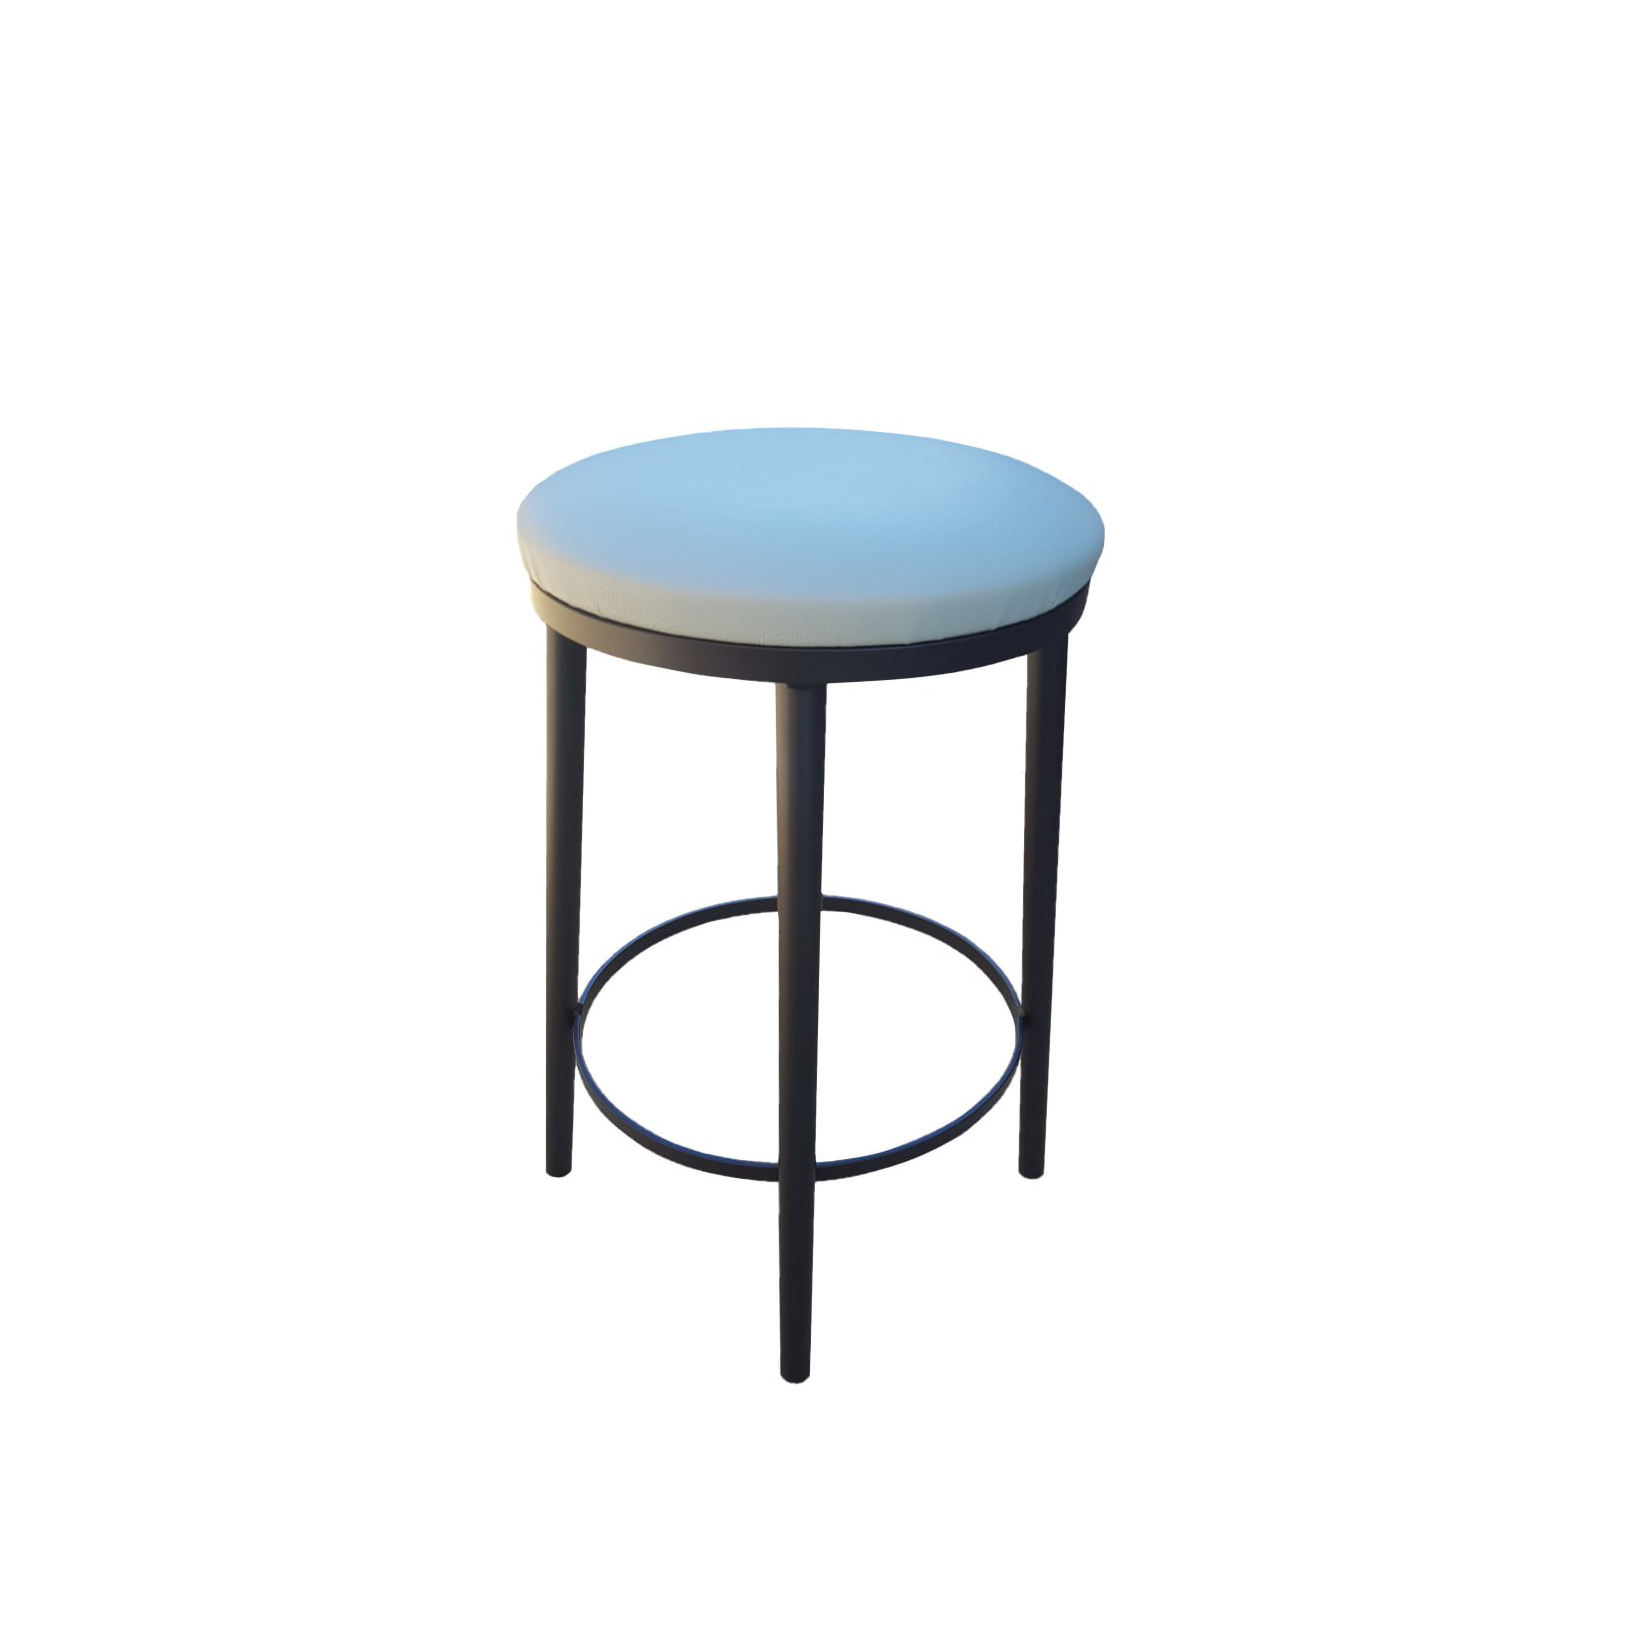 Deck Round Stool Powder Coated with Vinyl Light Blue Upholstery and Foot Support